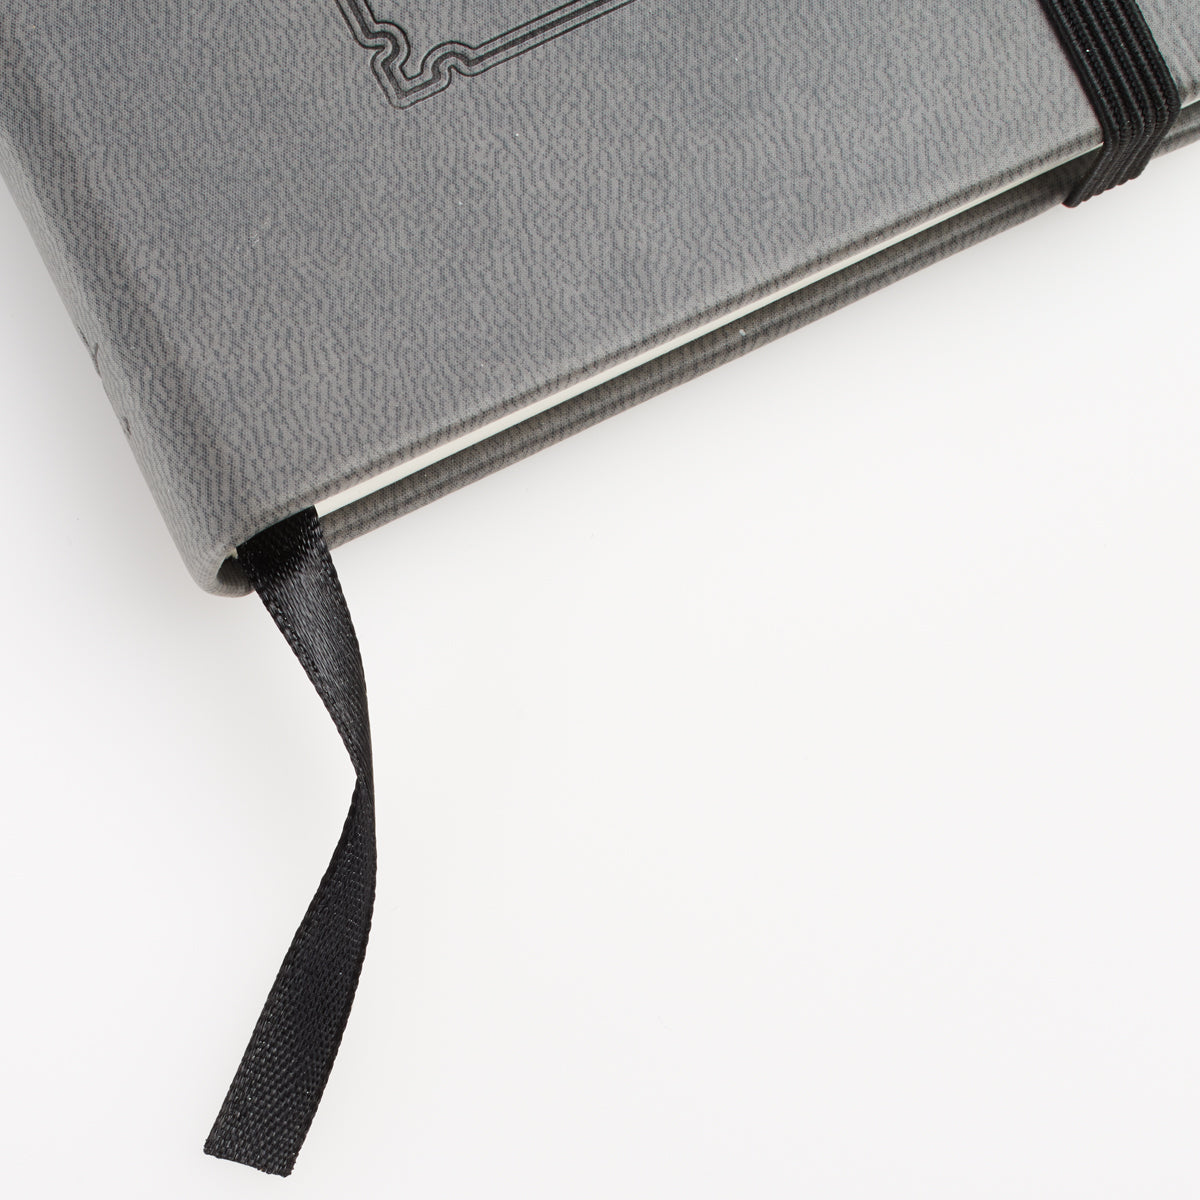 Image of Be Strong Hardcover LuxLeather Notebook with Elastic Closure other